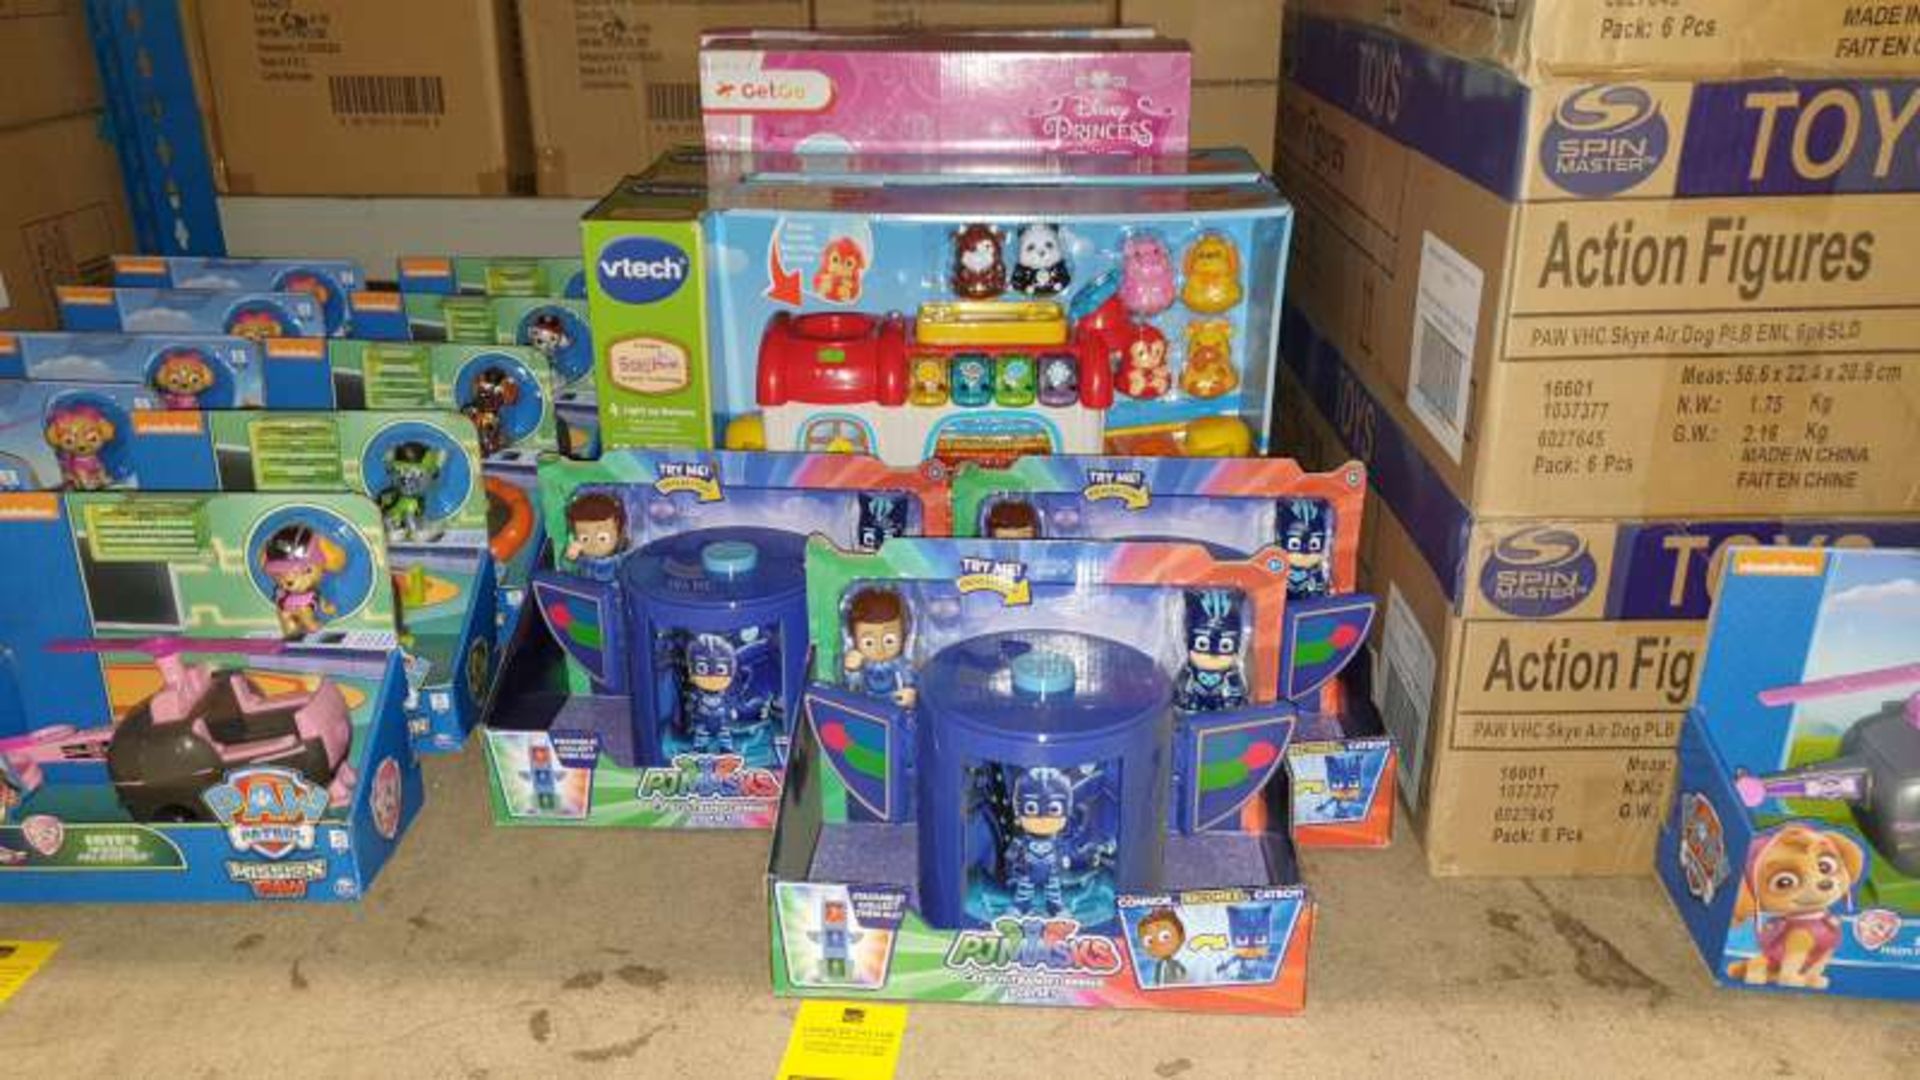 LOT CONTAINING 3 X PJMASKS CATBOY TRANSFORMING PLAYSETS, 2 X VTECH TOOT TOOT ANIMALS BOAT, 3 X